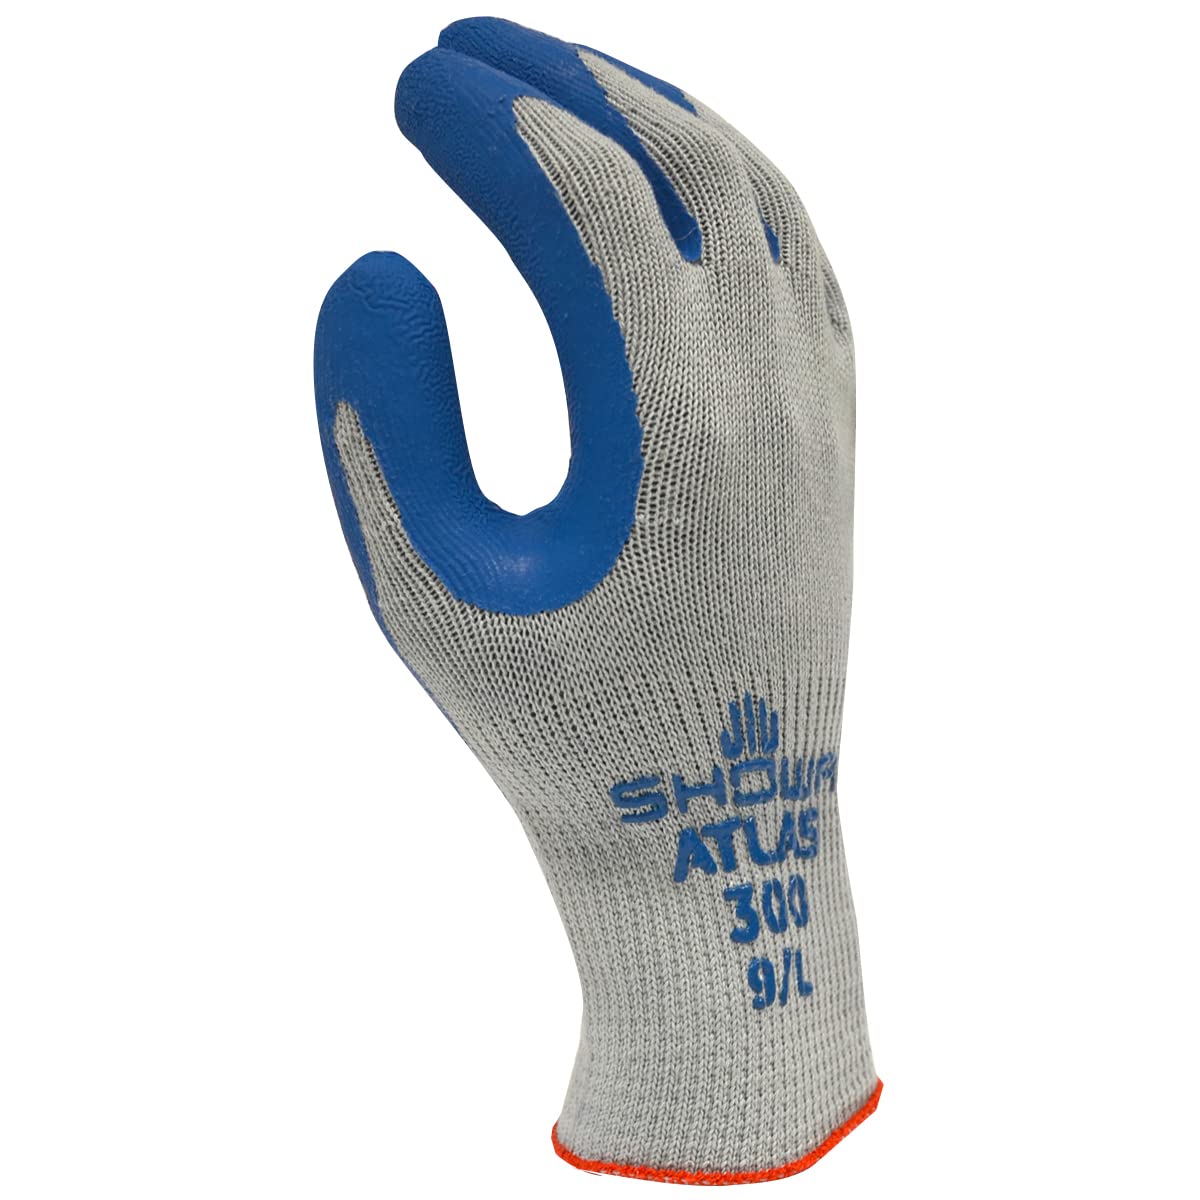 Atlas Fit 300 Rubber-Coated Gloves